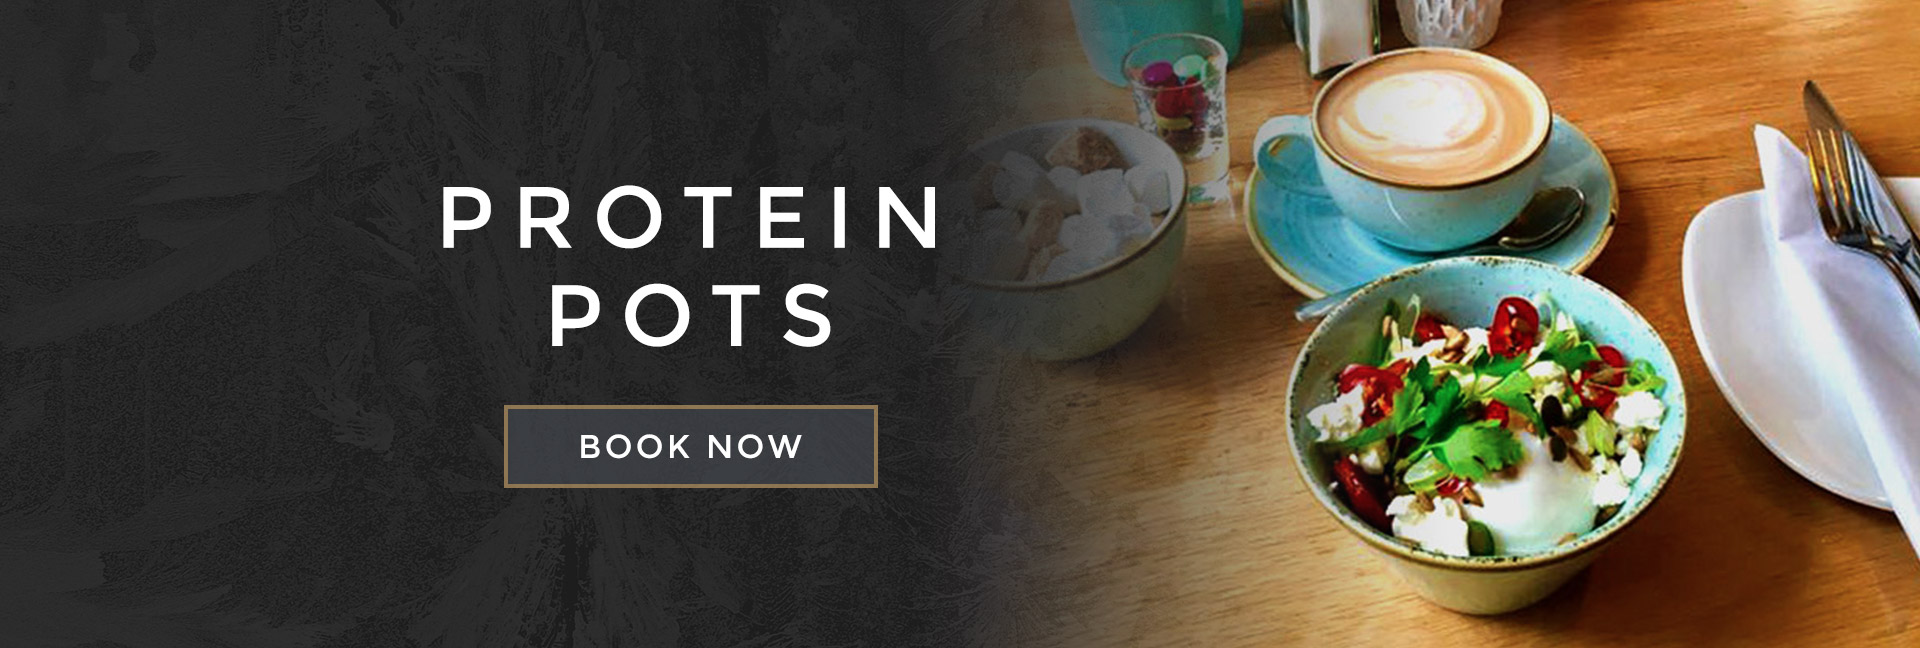 Protein pots at All Bar One Oxford - Book your table